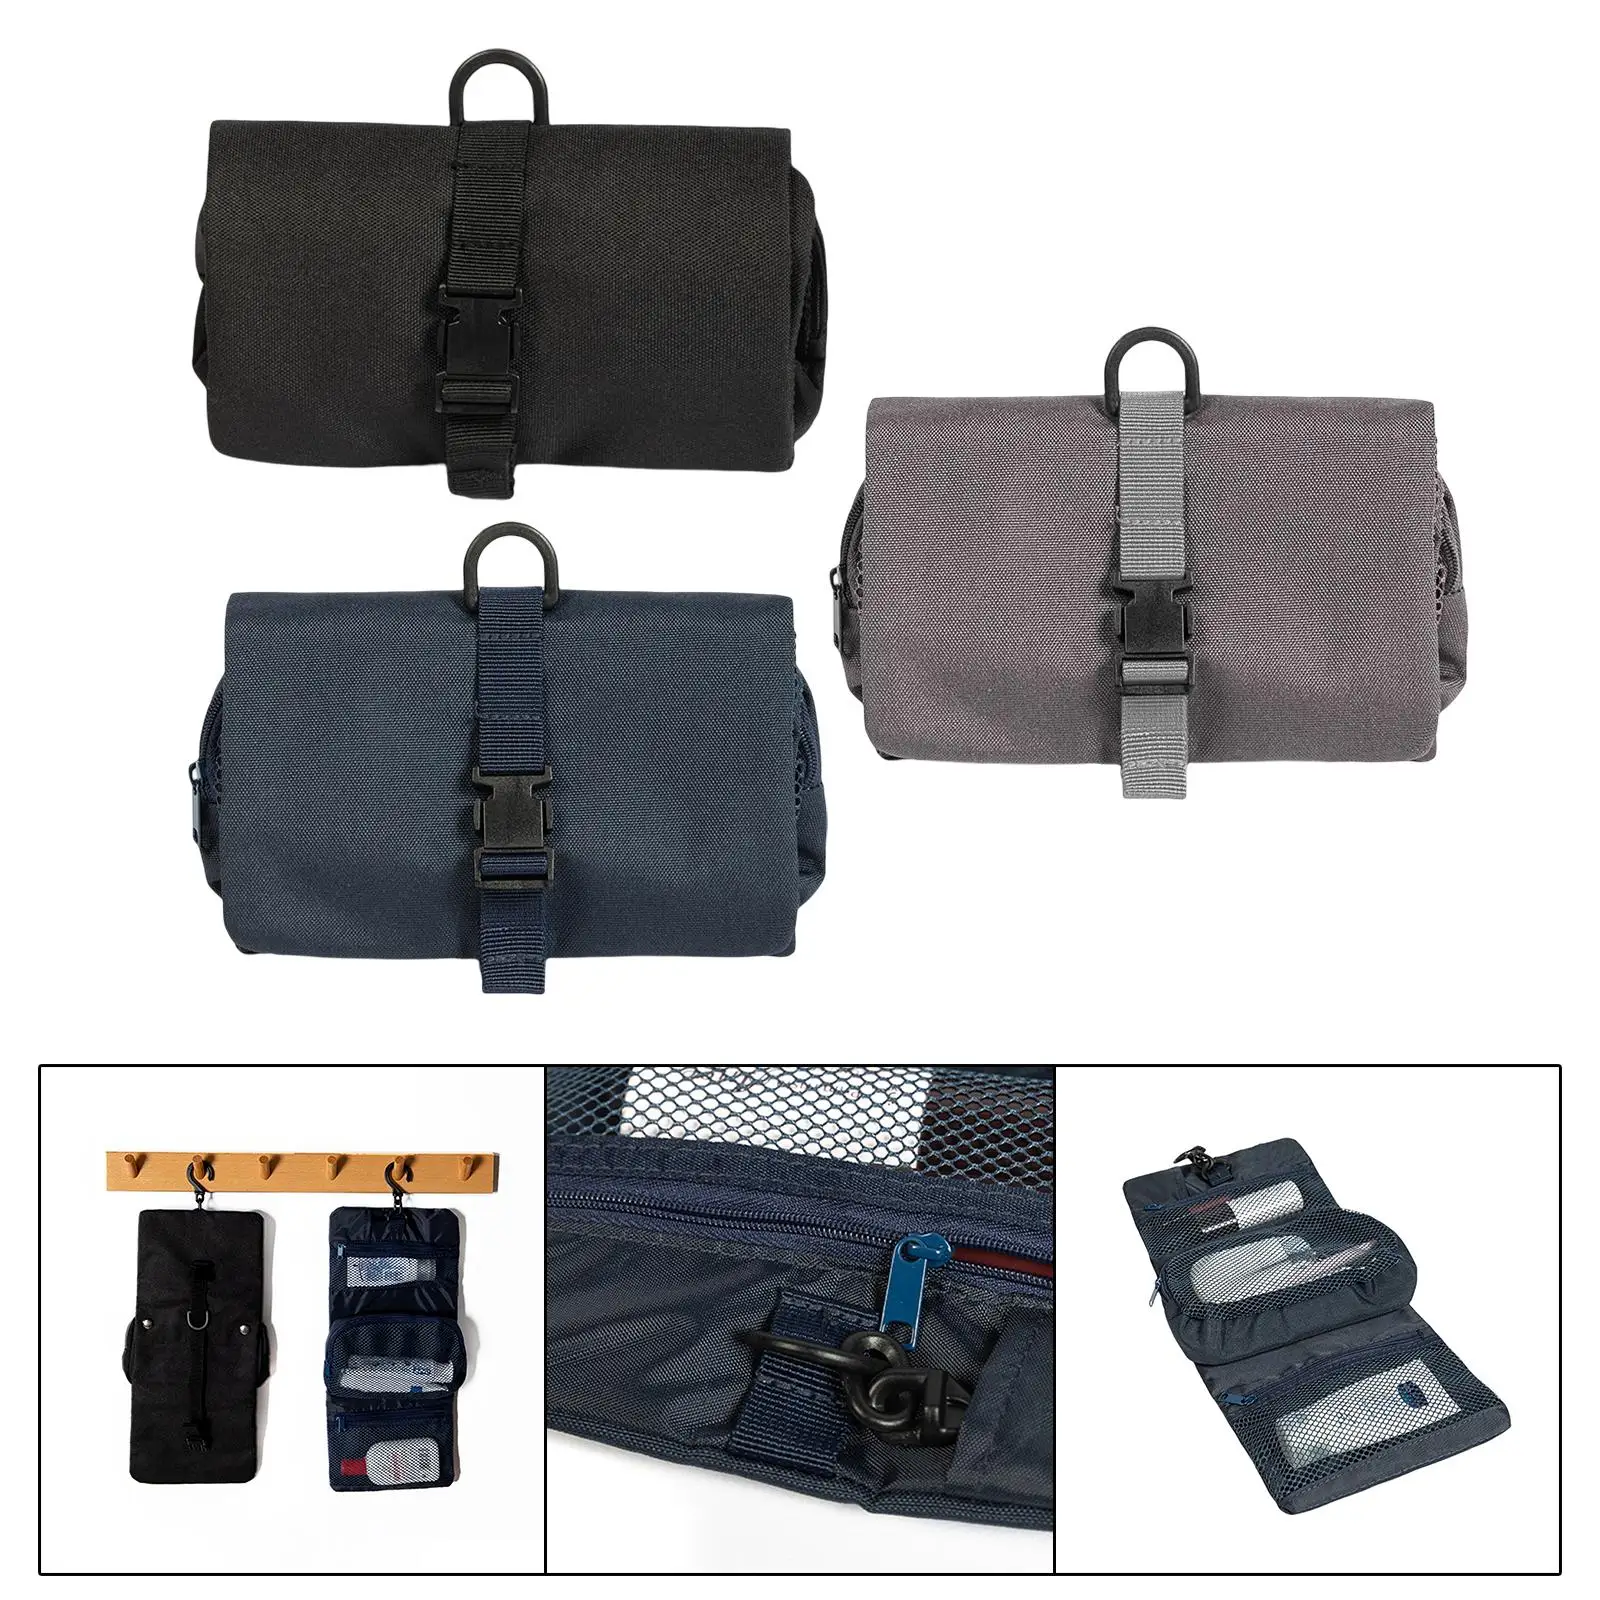 Travel Toiletry Bags Multifunctional Hanging Toiletries Storage Case Travel Pouch